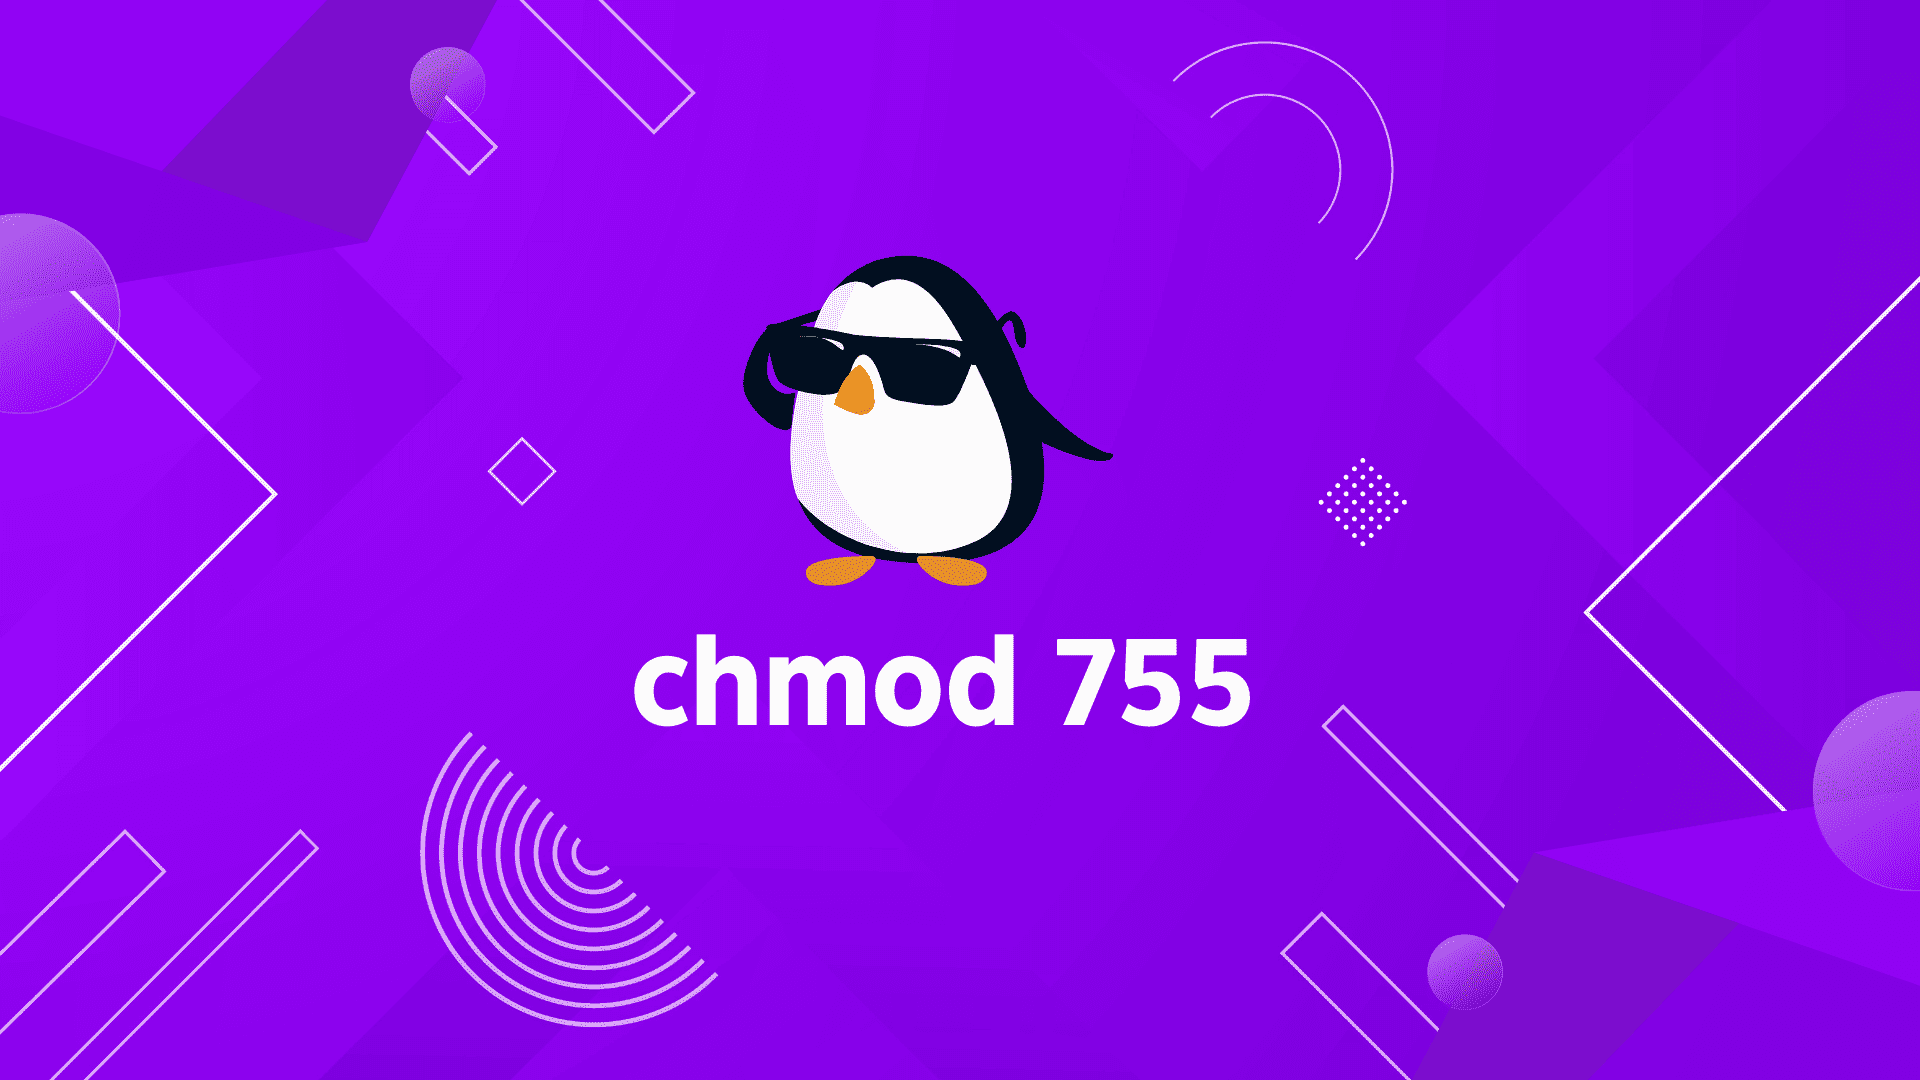 chmod 755 command in Linux